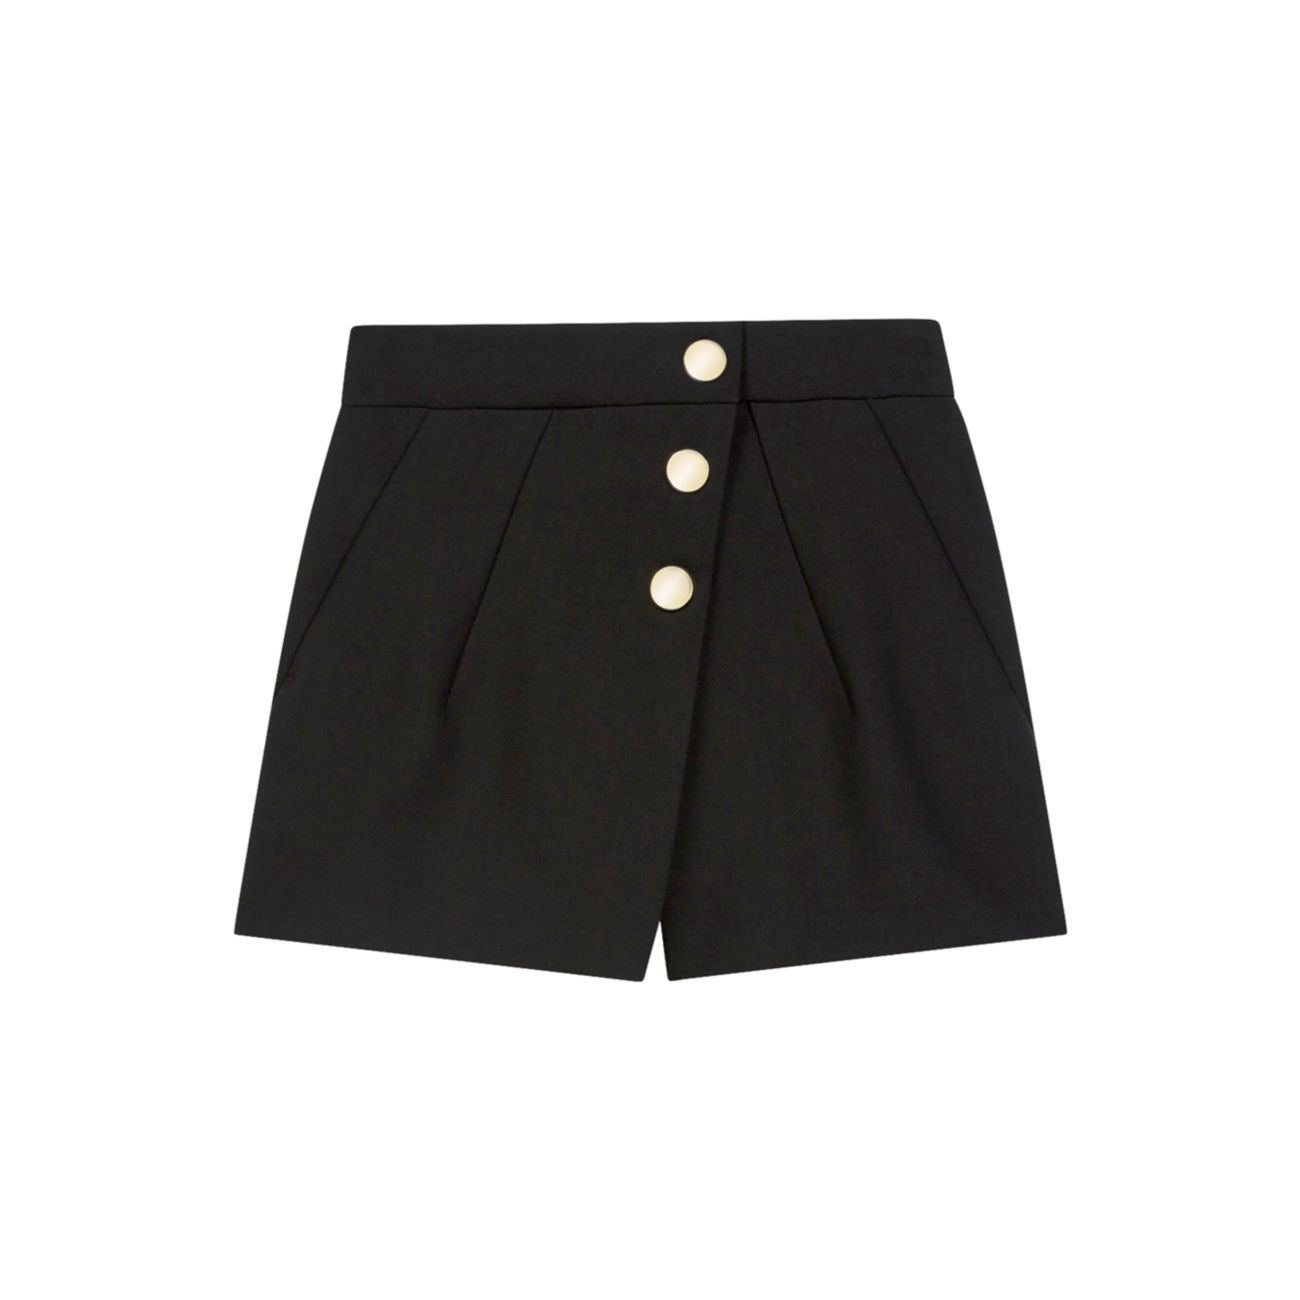 Buttoned Skirt-Front Shorts Maje